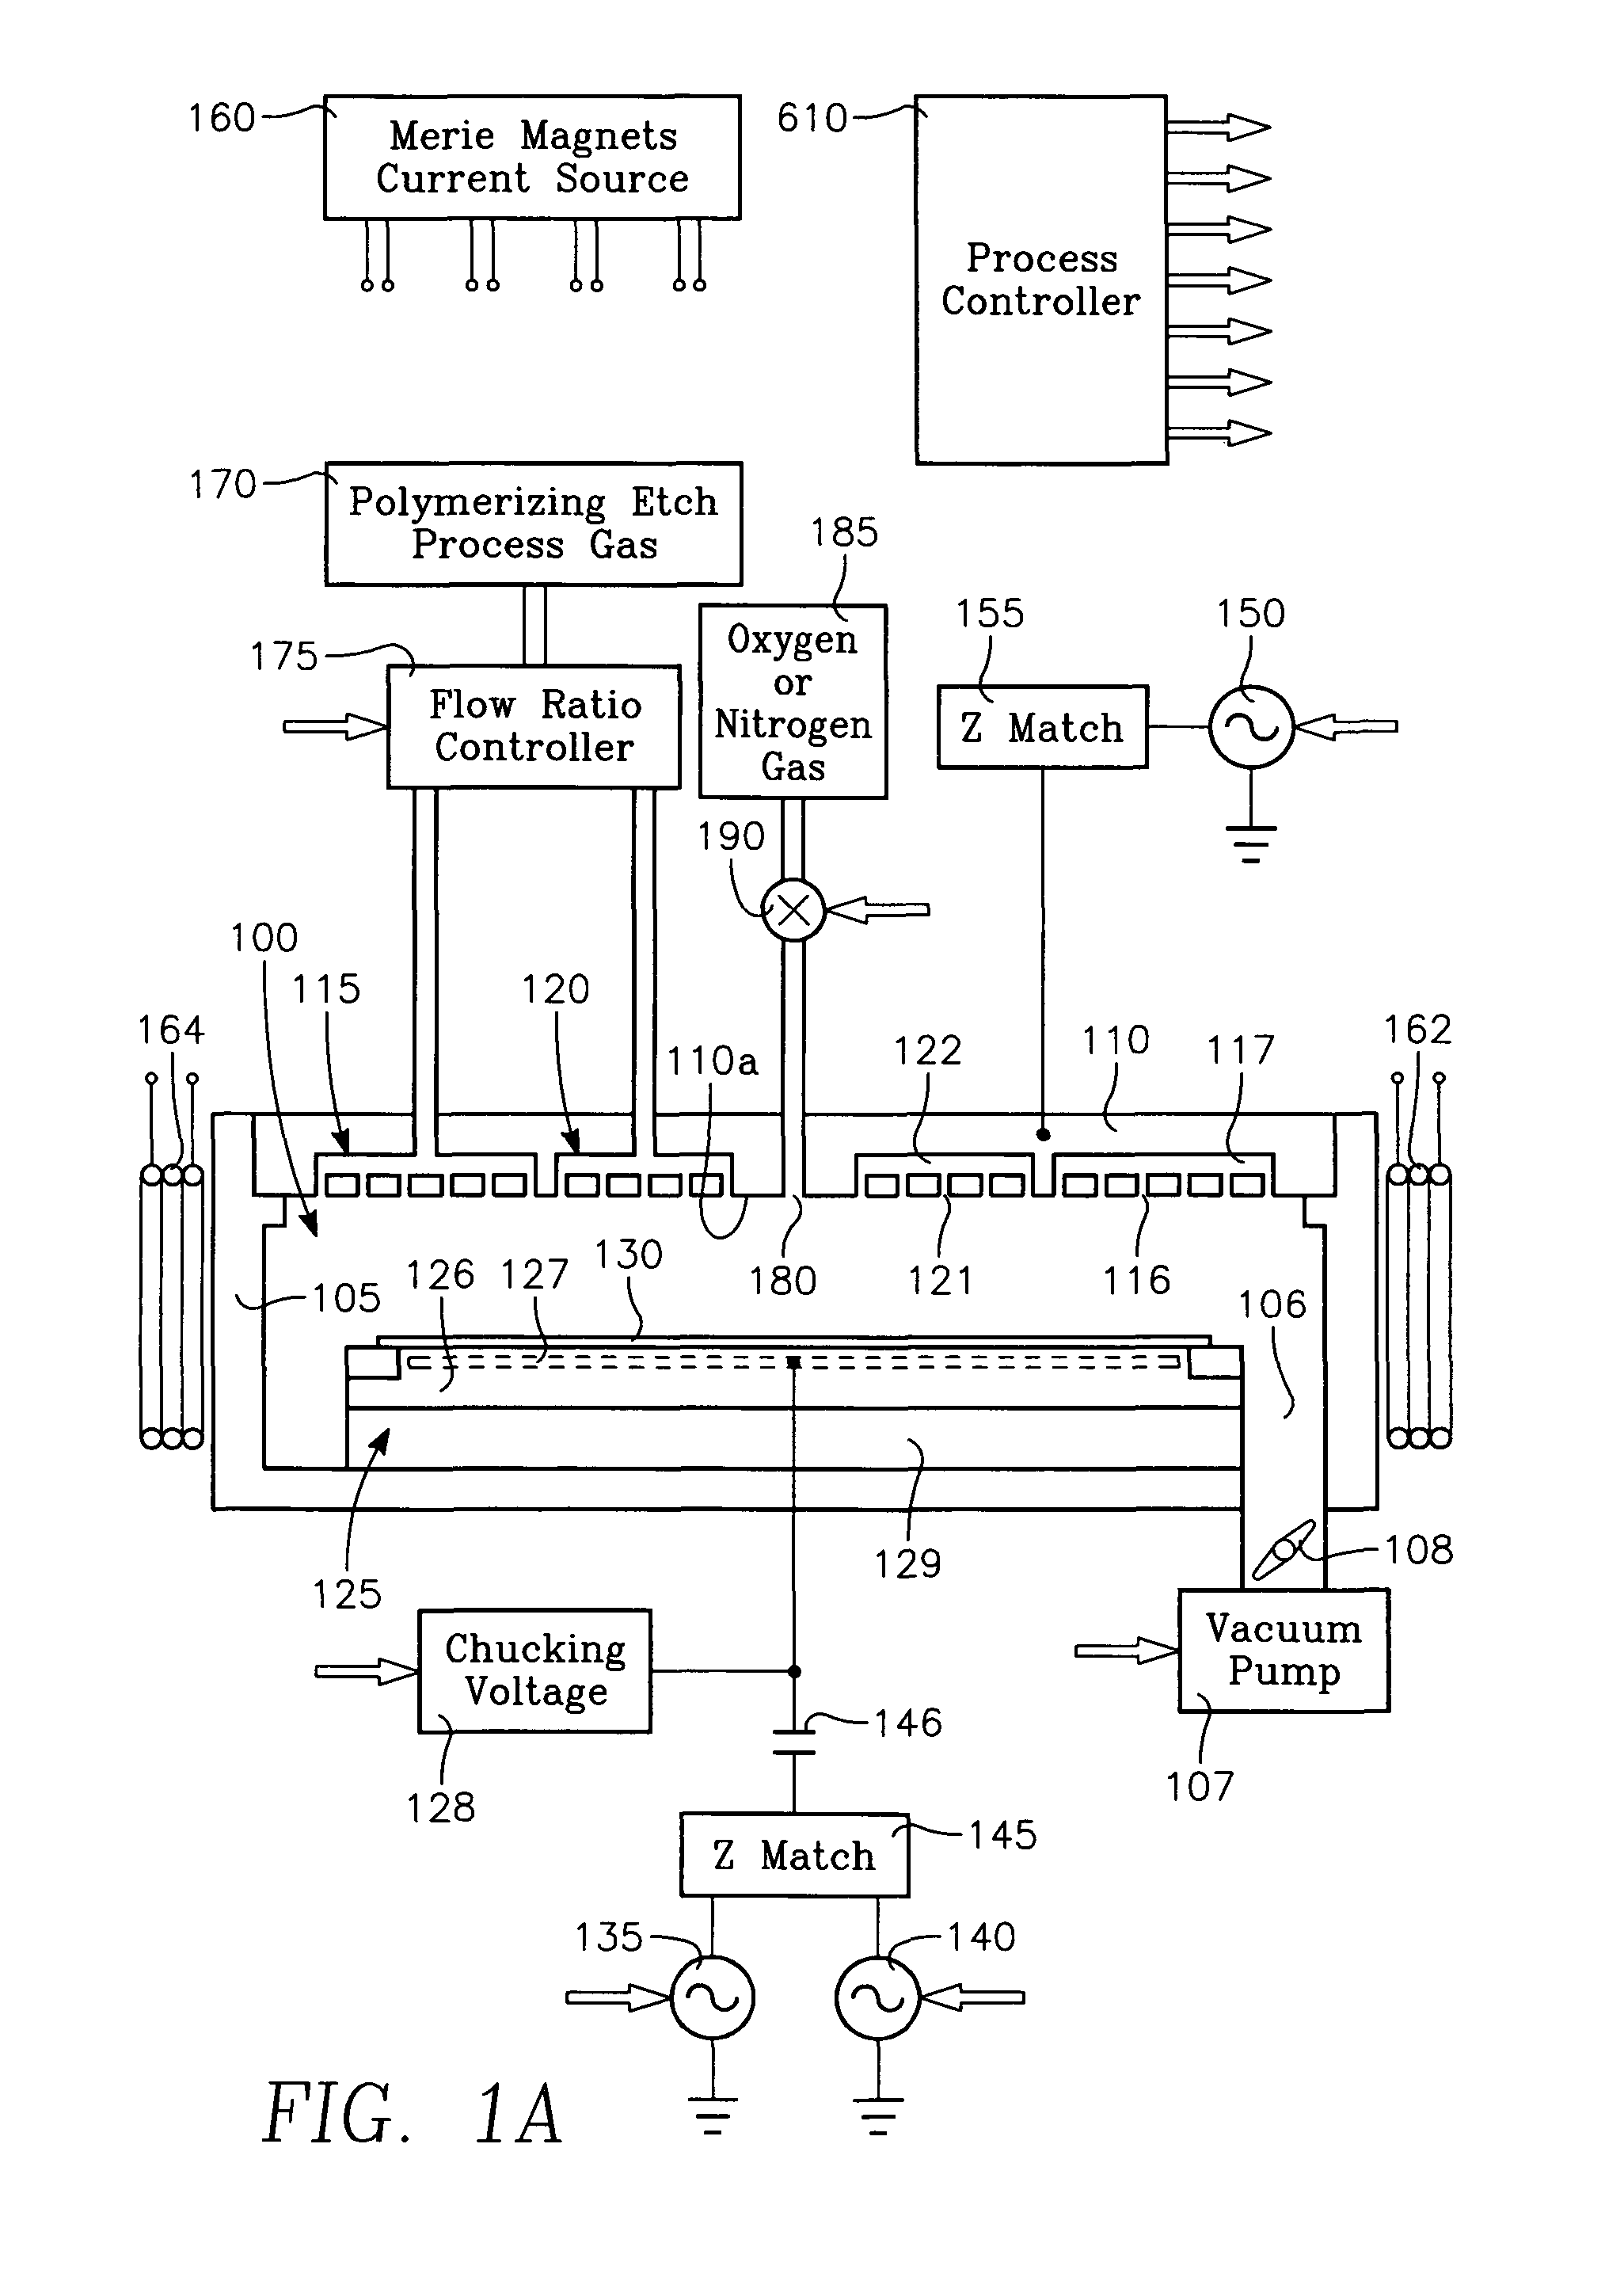 Plasma reactor apparatus with multiple gas injection zones having time-changing separate configurable gas compositions for each zone